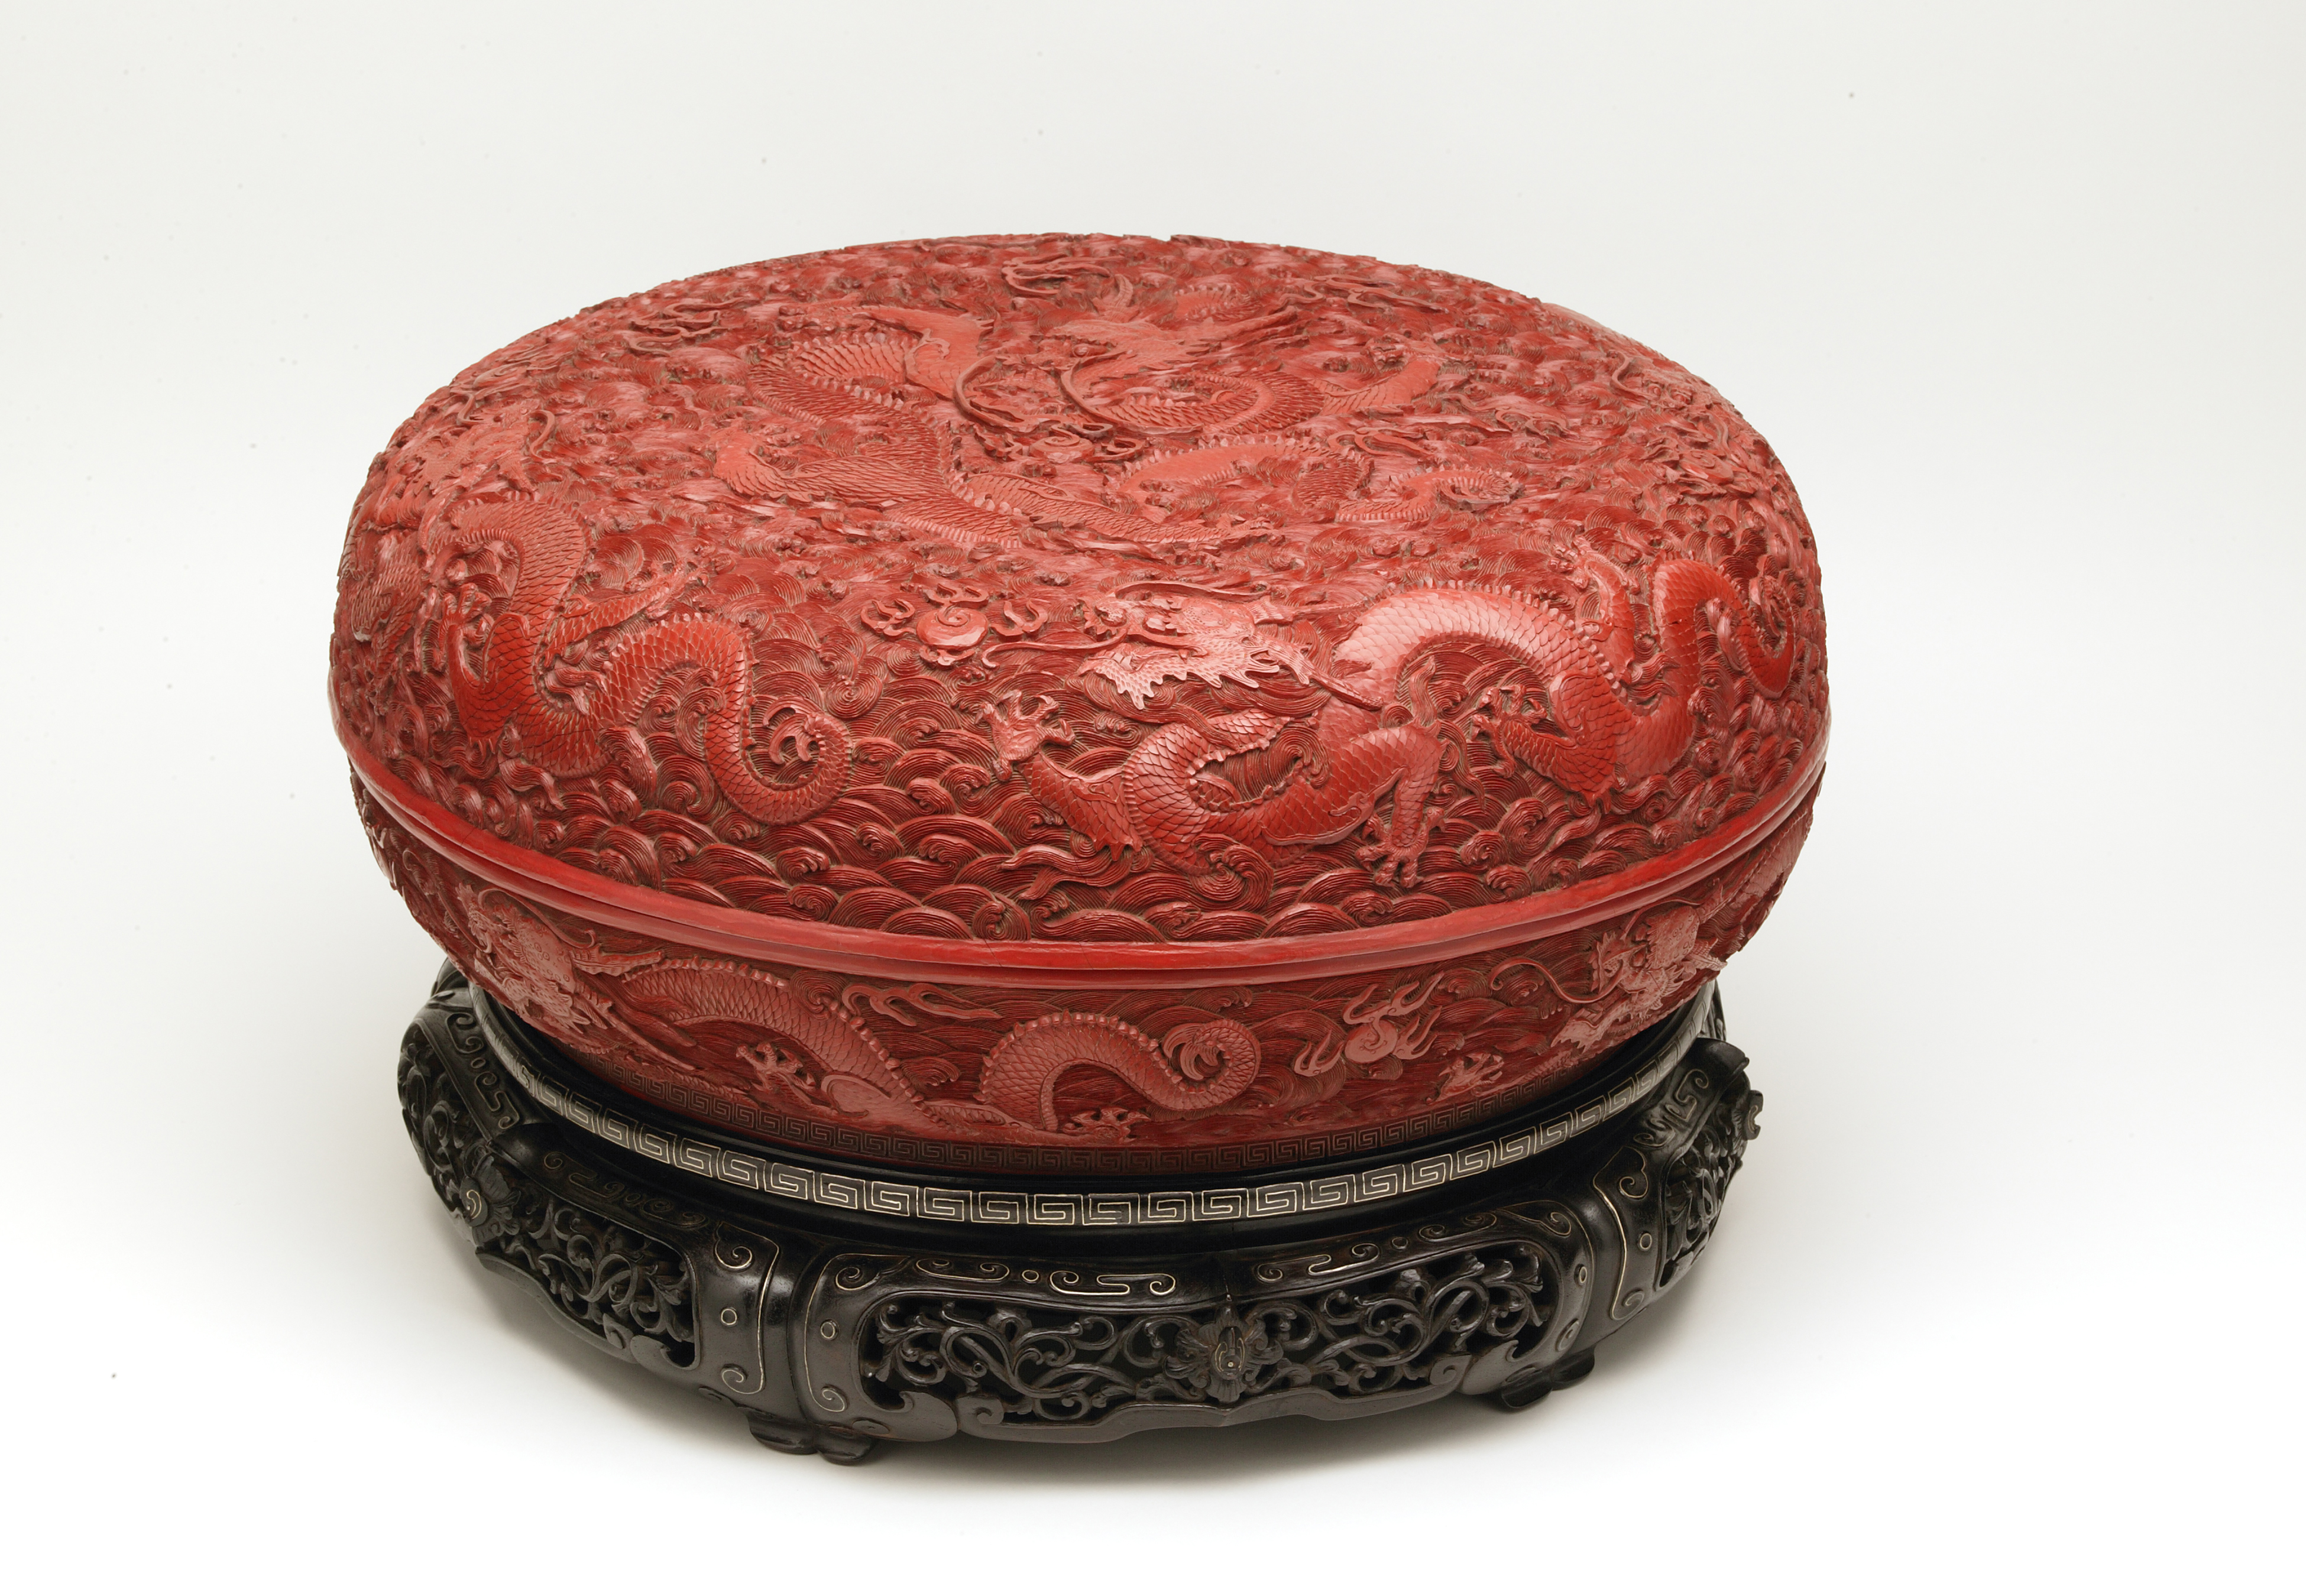 A single object image of a red lacquer box with dragon motifs on a wooden base.